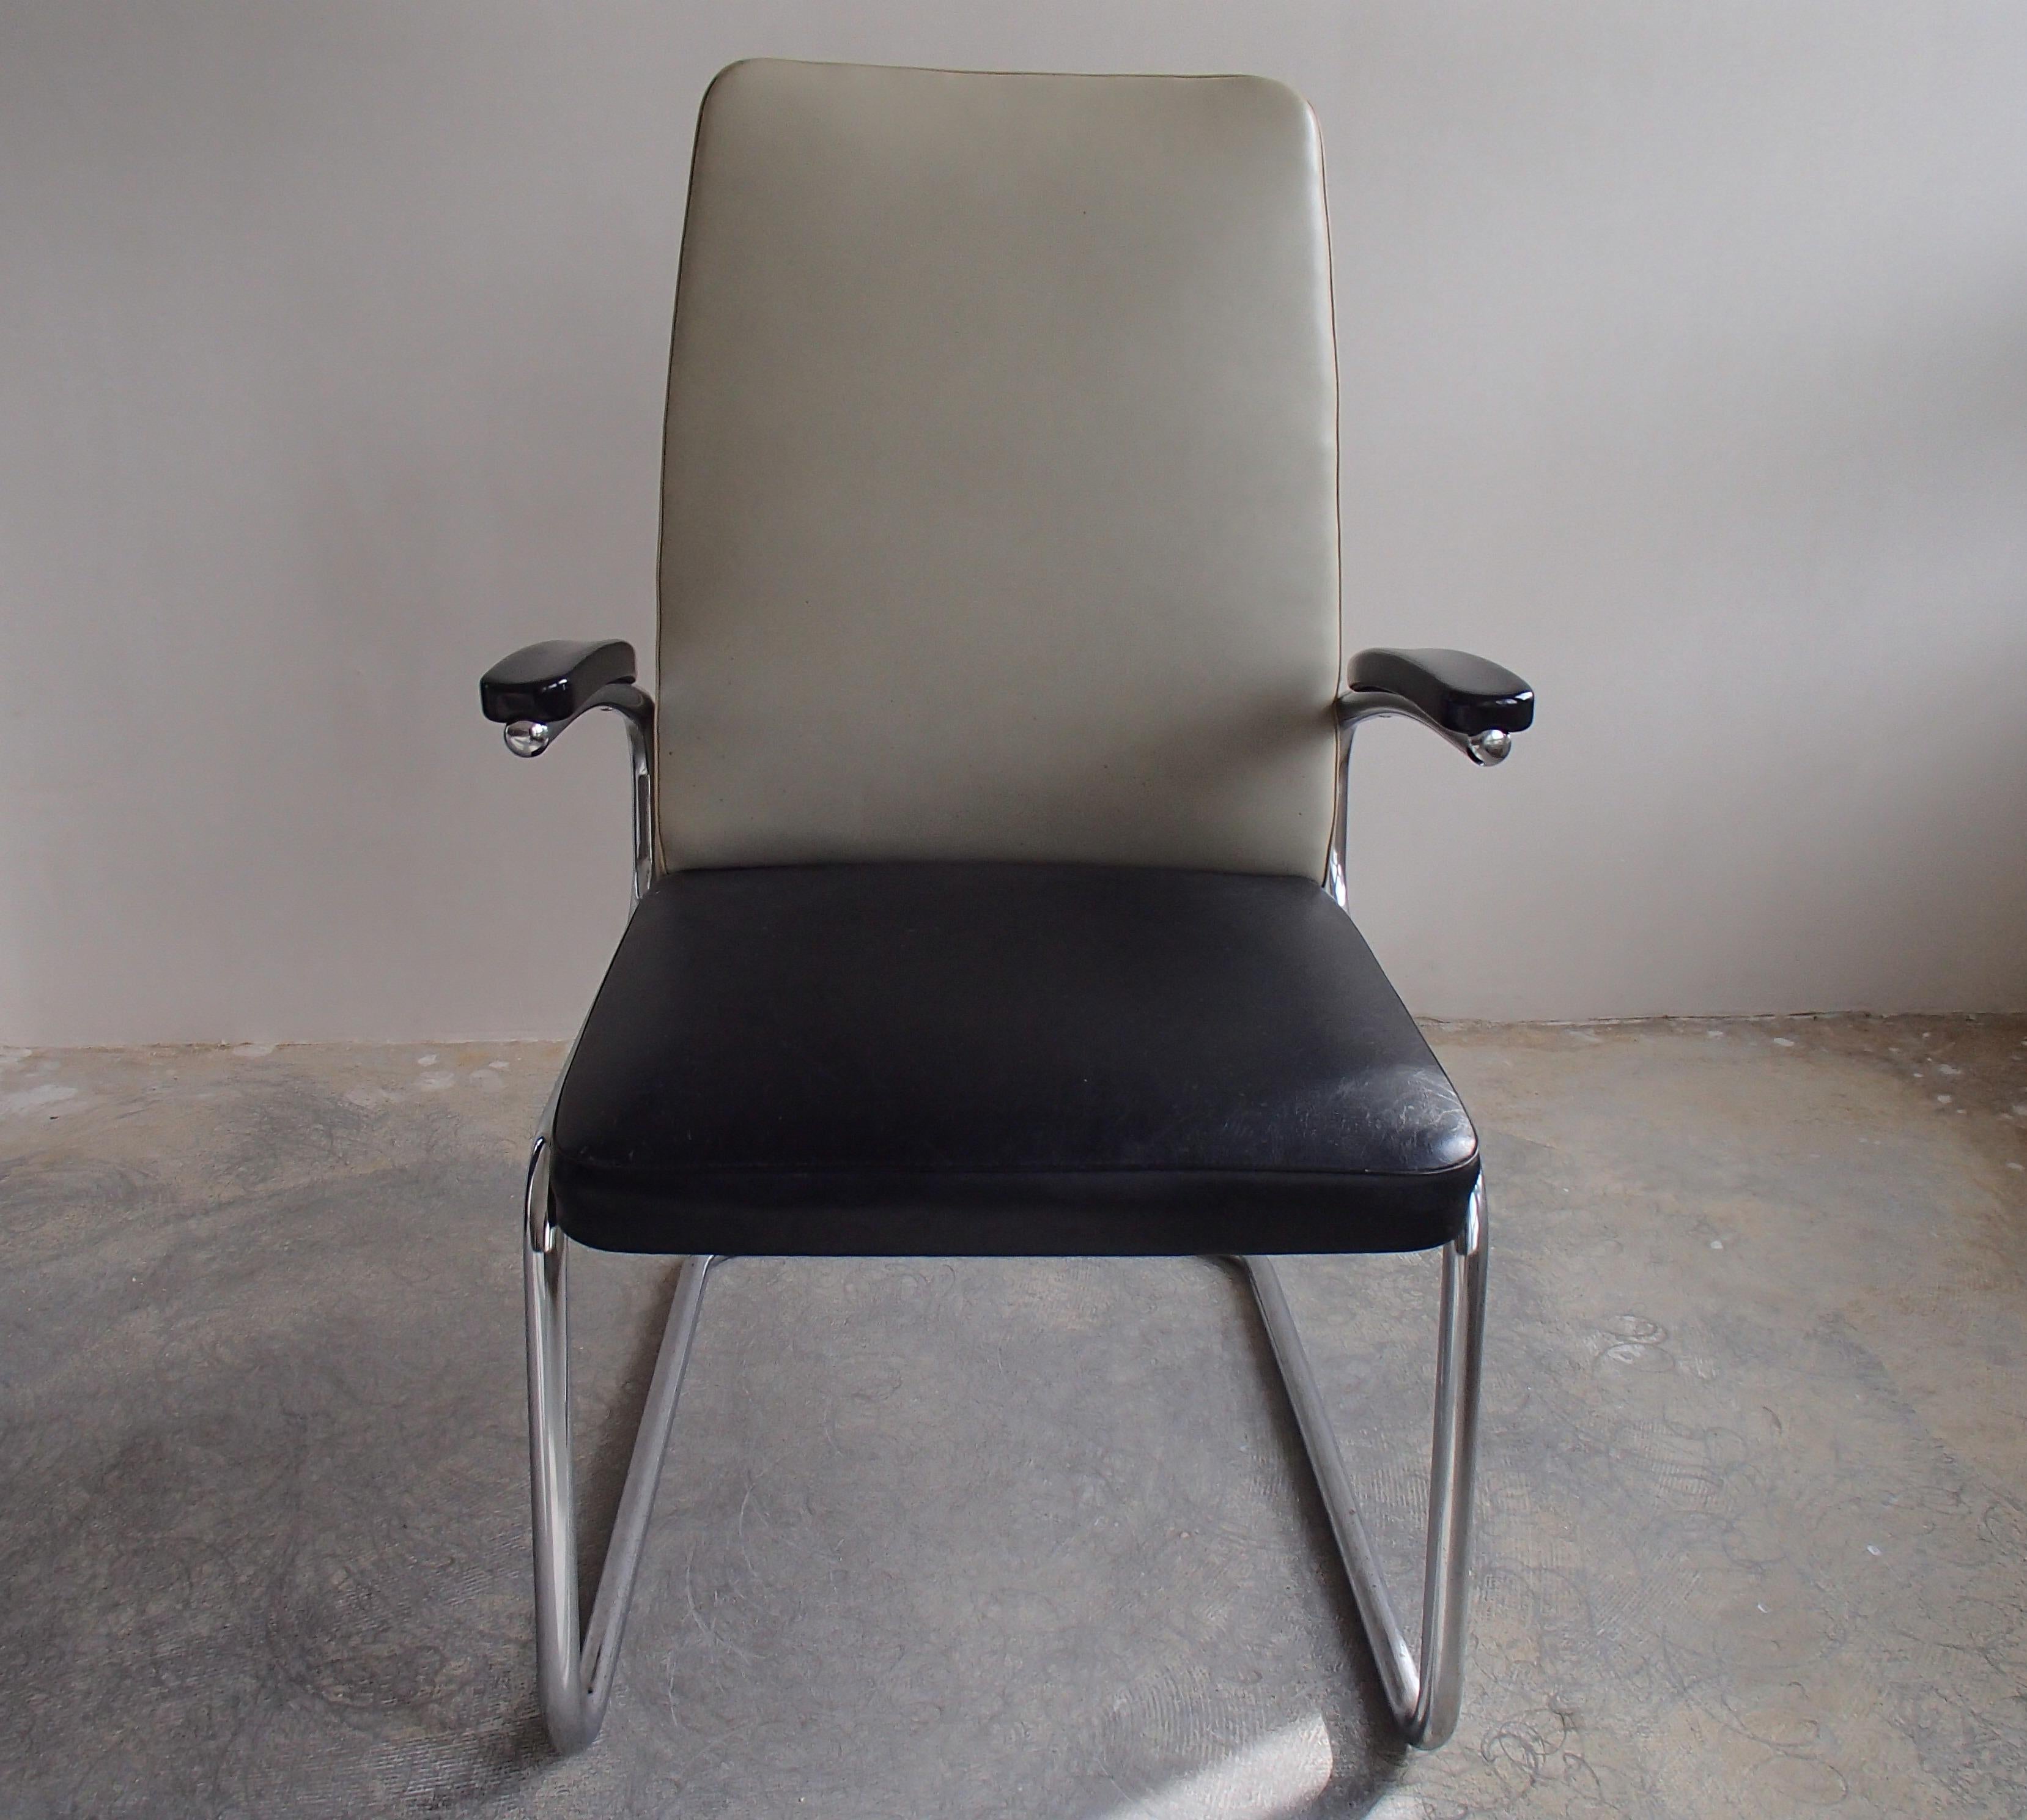 Midcentury Mauser armchair with original leatherette grey and black.